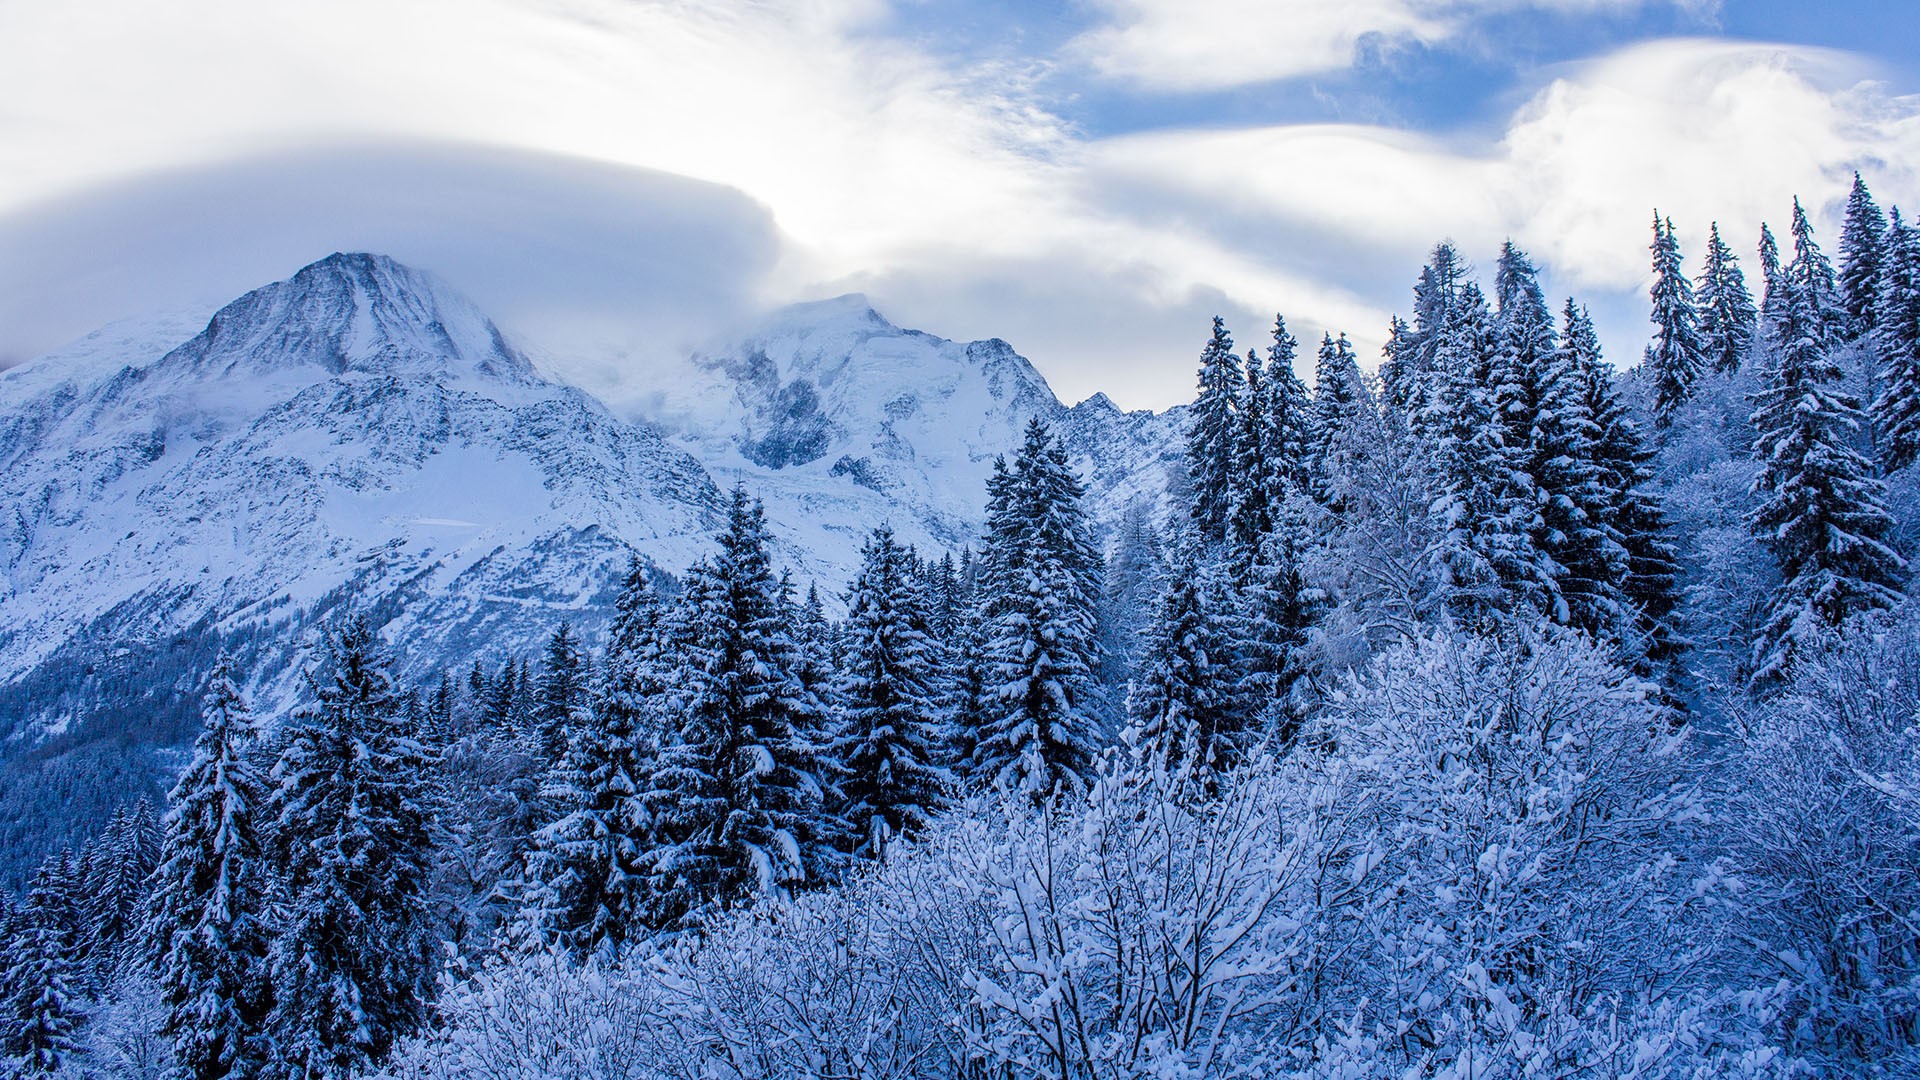 General 1920x1080 nature landscape trees forest clouds sky snow winter Mont Blanc France